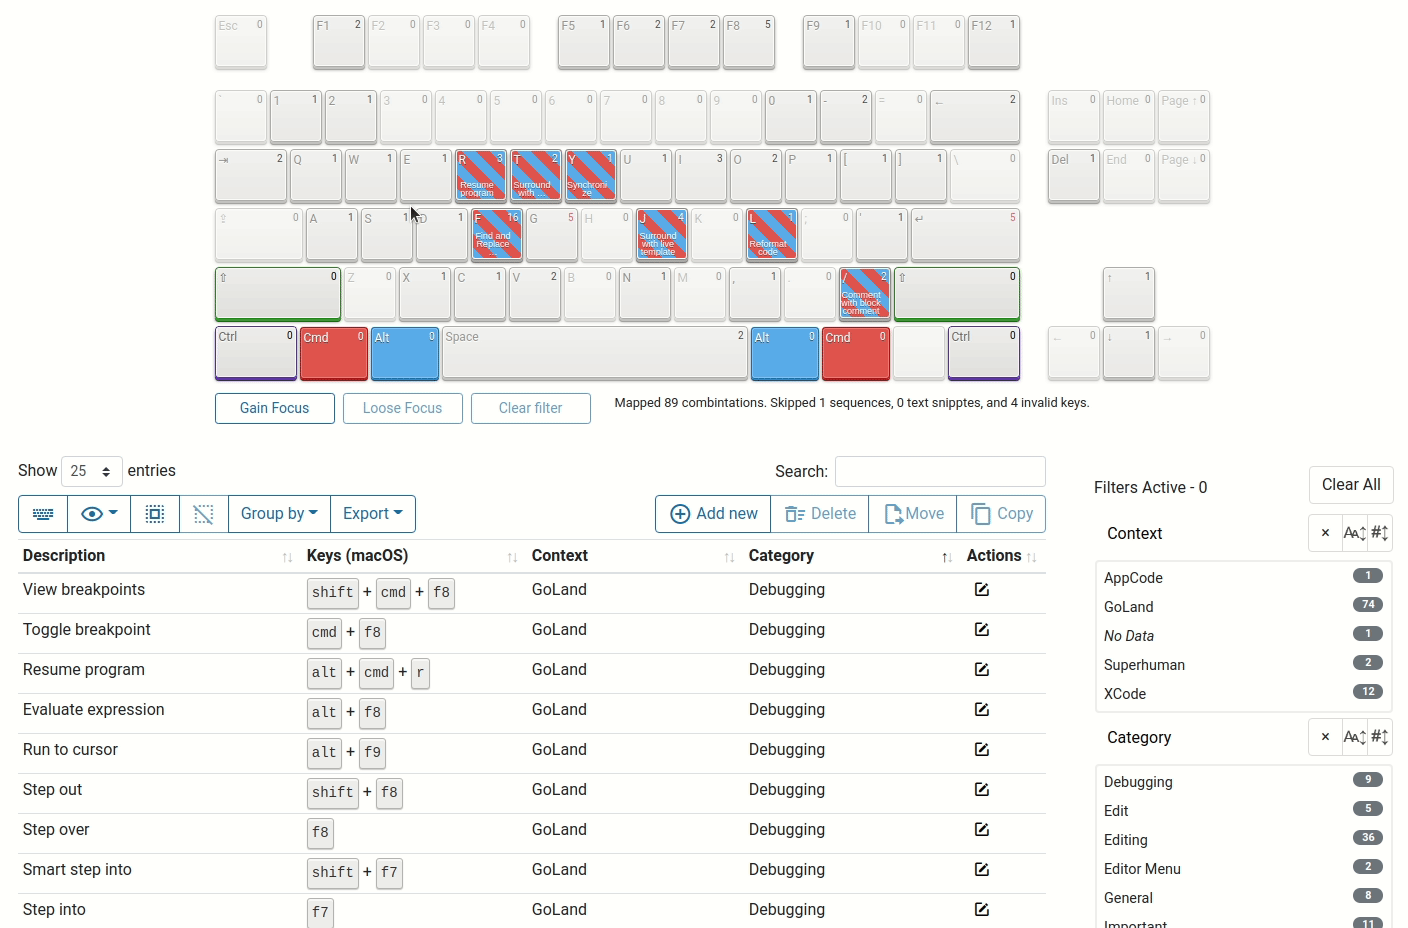 Filtering the collection table for all shortcuts that contain the F key.